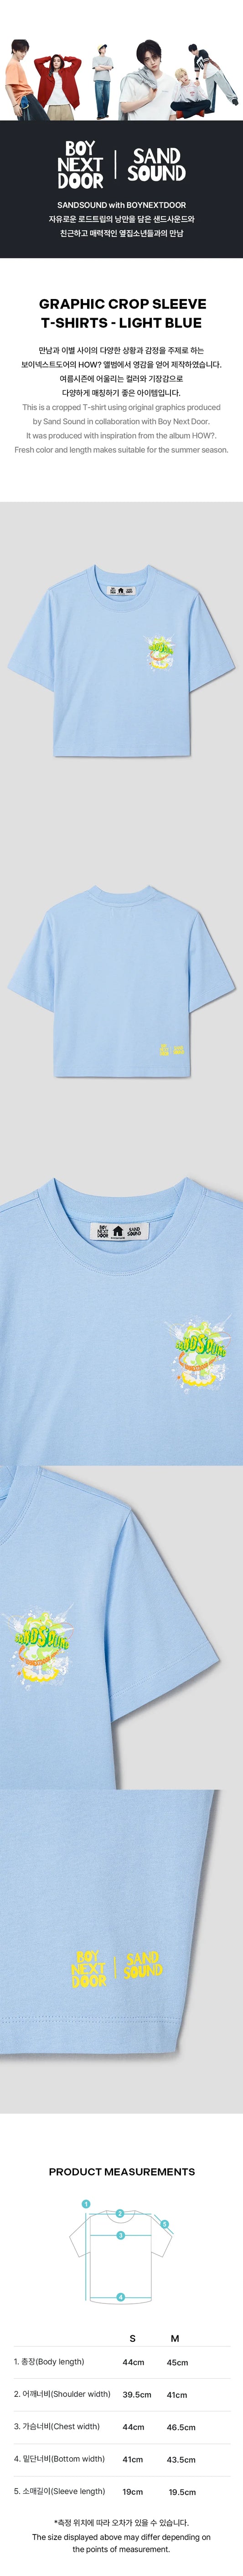 BOYNEXTDOOR - SAND SOUND CAPSULE COLLECTION OFFICIAL MD GRAPIC CROP SLEEVE T SHIRTS LIGHT BLUE